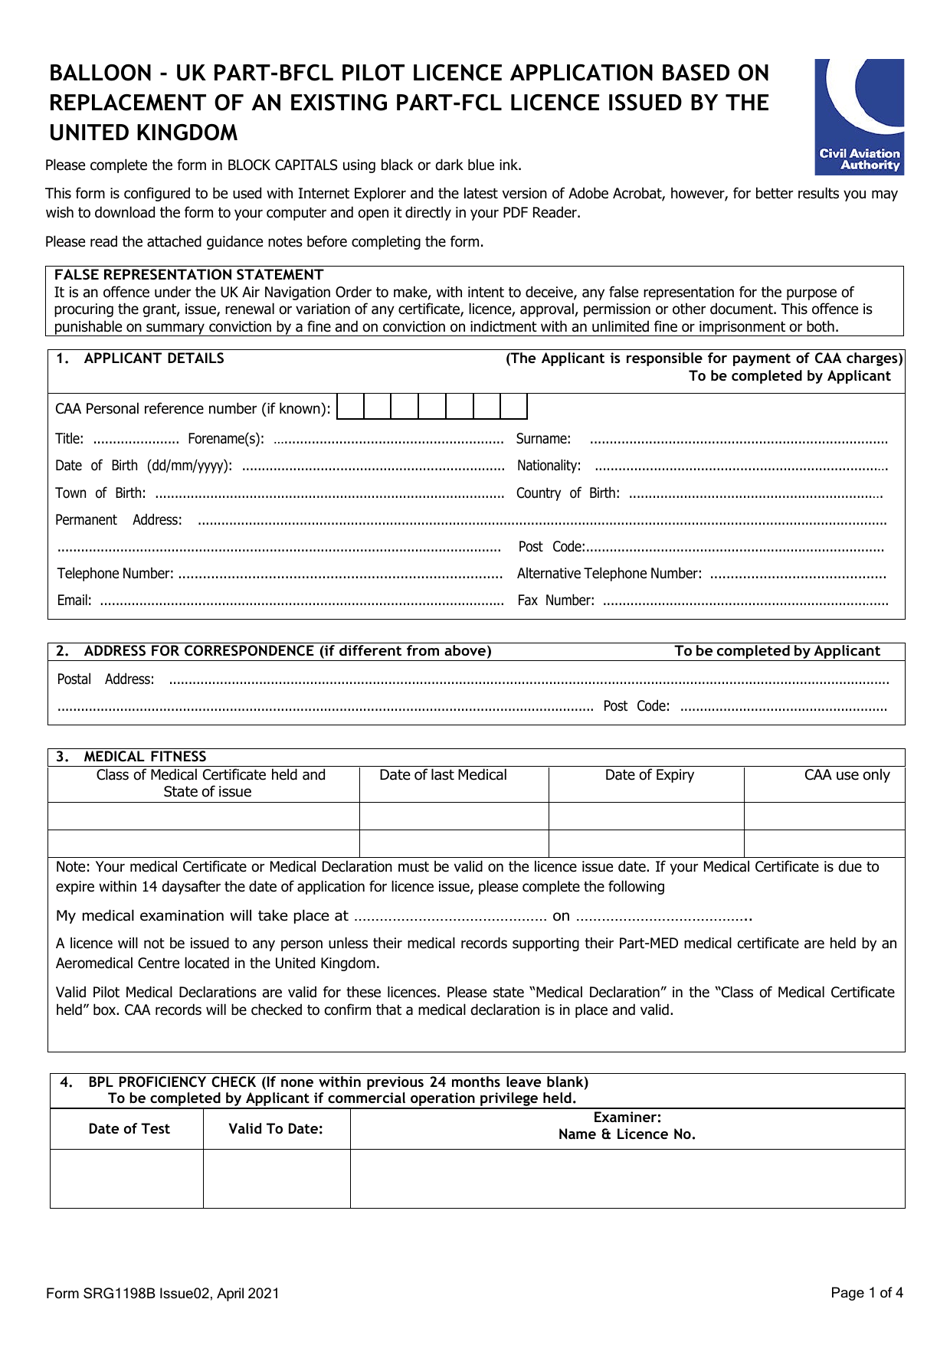 Form SRG1198B Balloon - UK Part-Bfcl Pilot Licence Application Based on Replacement of an Existing Part-Fcl Licence Issued by the United Kingdom - United Kingdom, Page 1